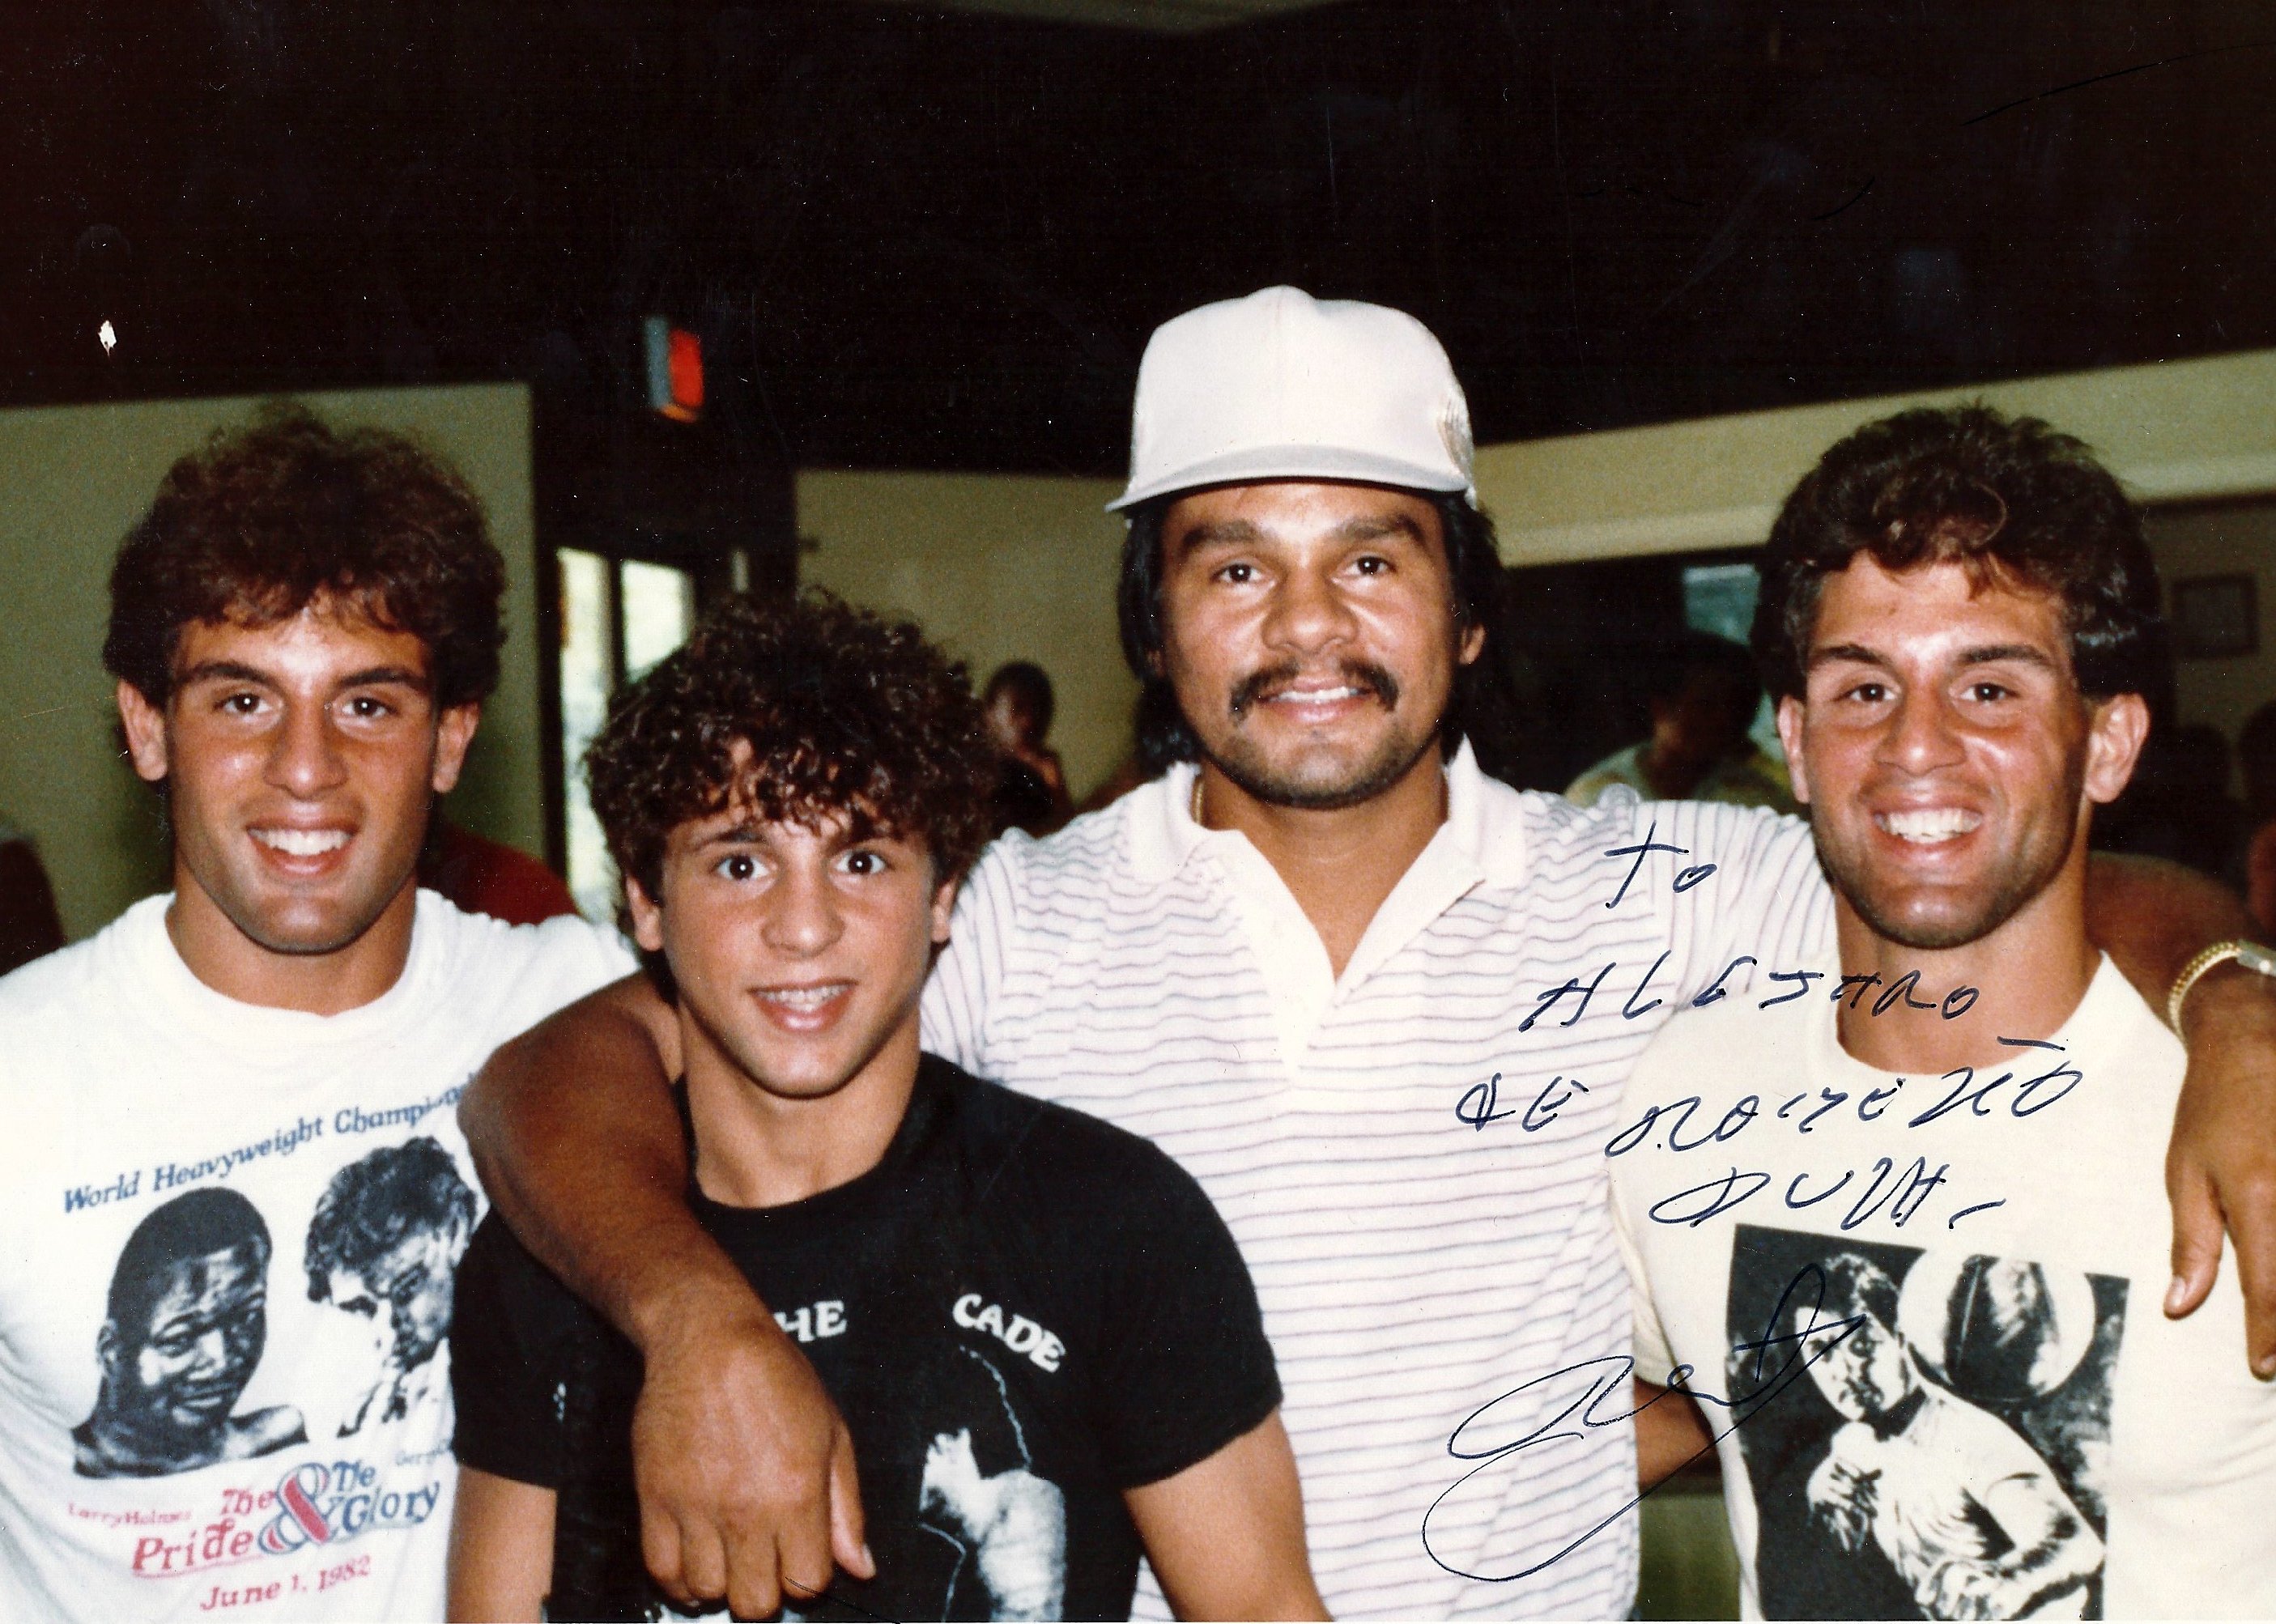 Roberto Duran surrounded by Alex, Gerard, and John Rinaldi in 1982